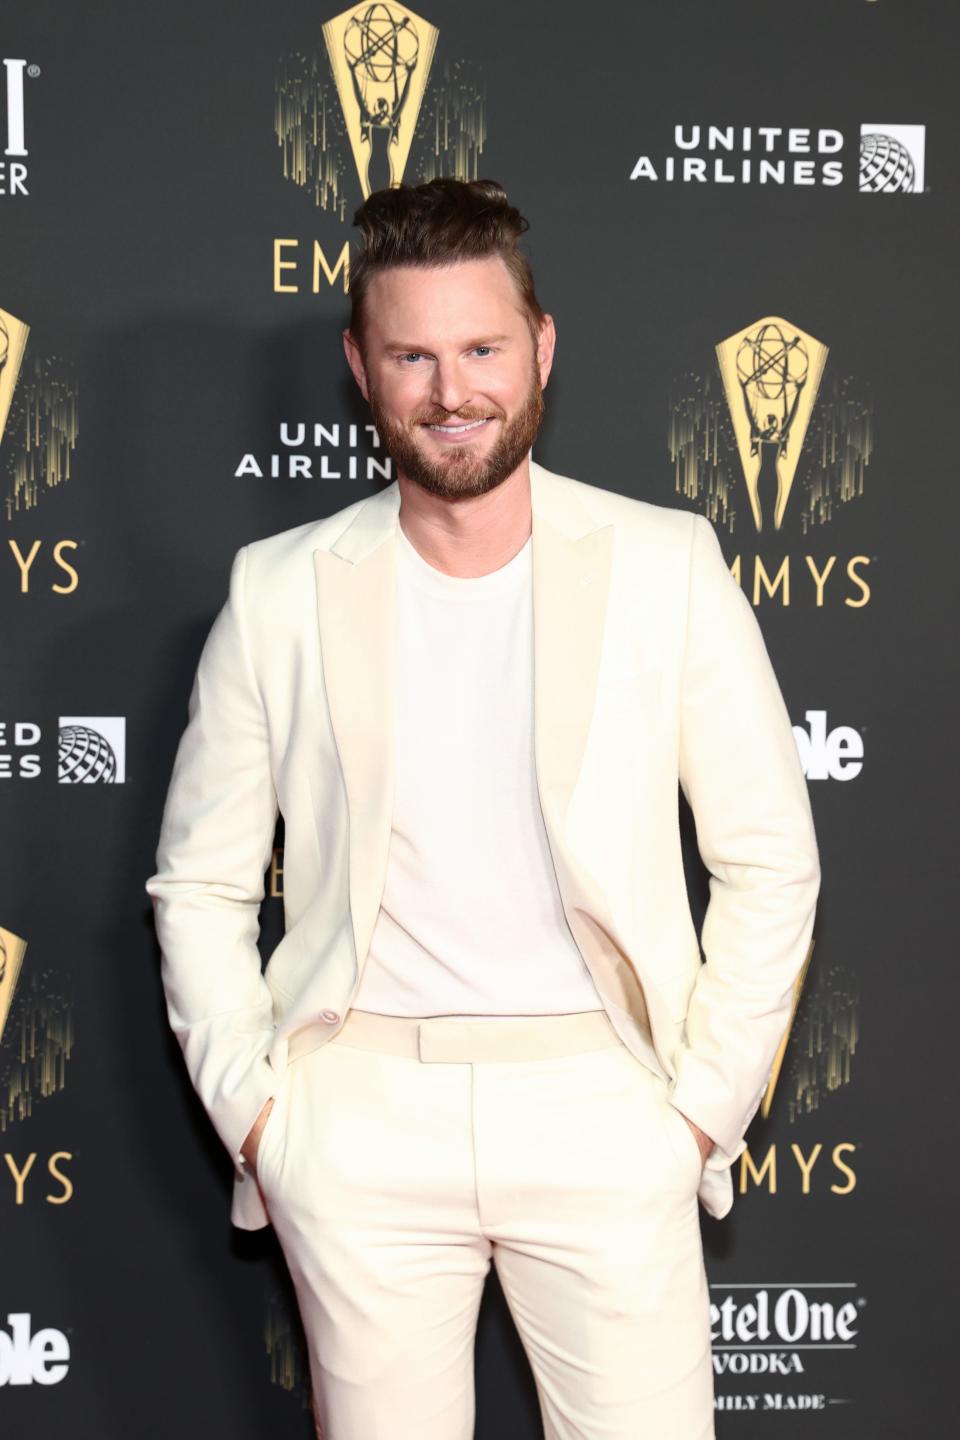 Bobby Berk announced his departure from "Queer Eye" after eight seasons.